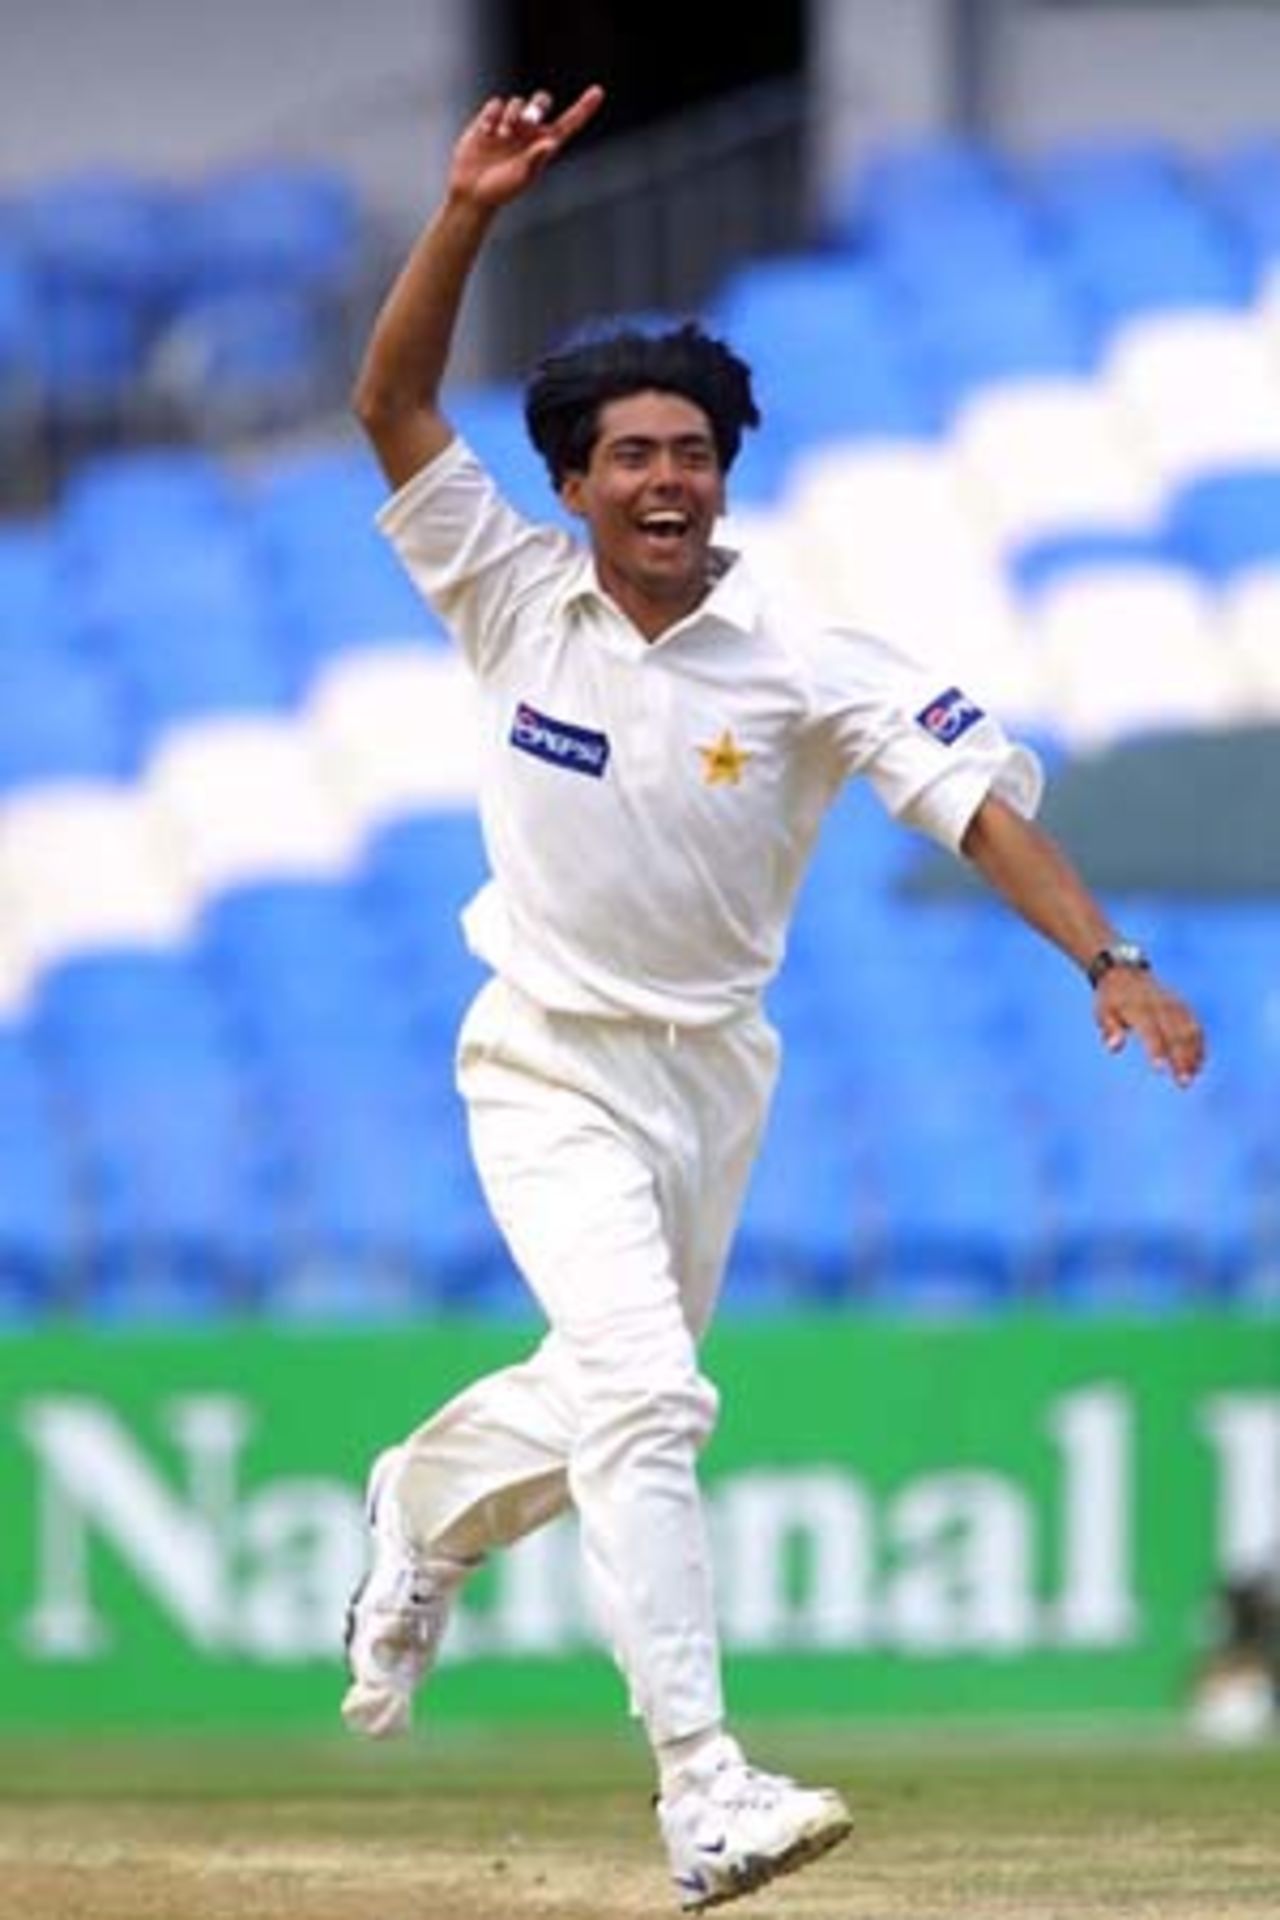 Debutant Pakistan bowler Mohammad Sami celebrates another New Zealand wicket. Sami took 5-36 in New Zealand's second innings for a match haul of 8-106 to earn the Man of the Match award. 1st Test: New Zealand v Pakistan at Eden Park, Auckland, 8-12 March 2001 (12 March 2001).